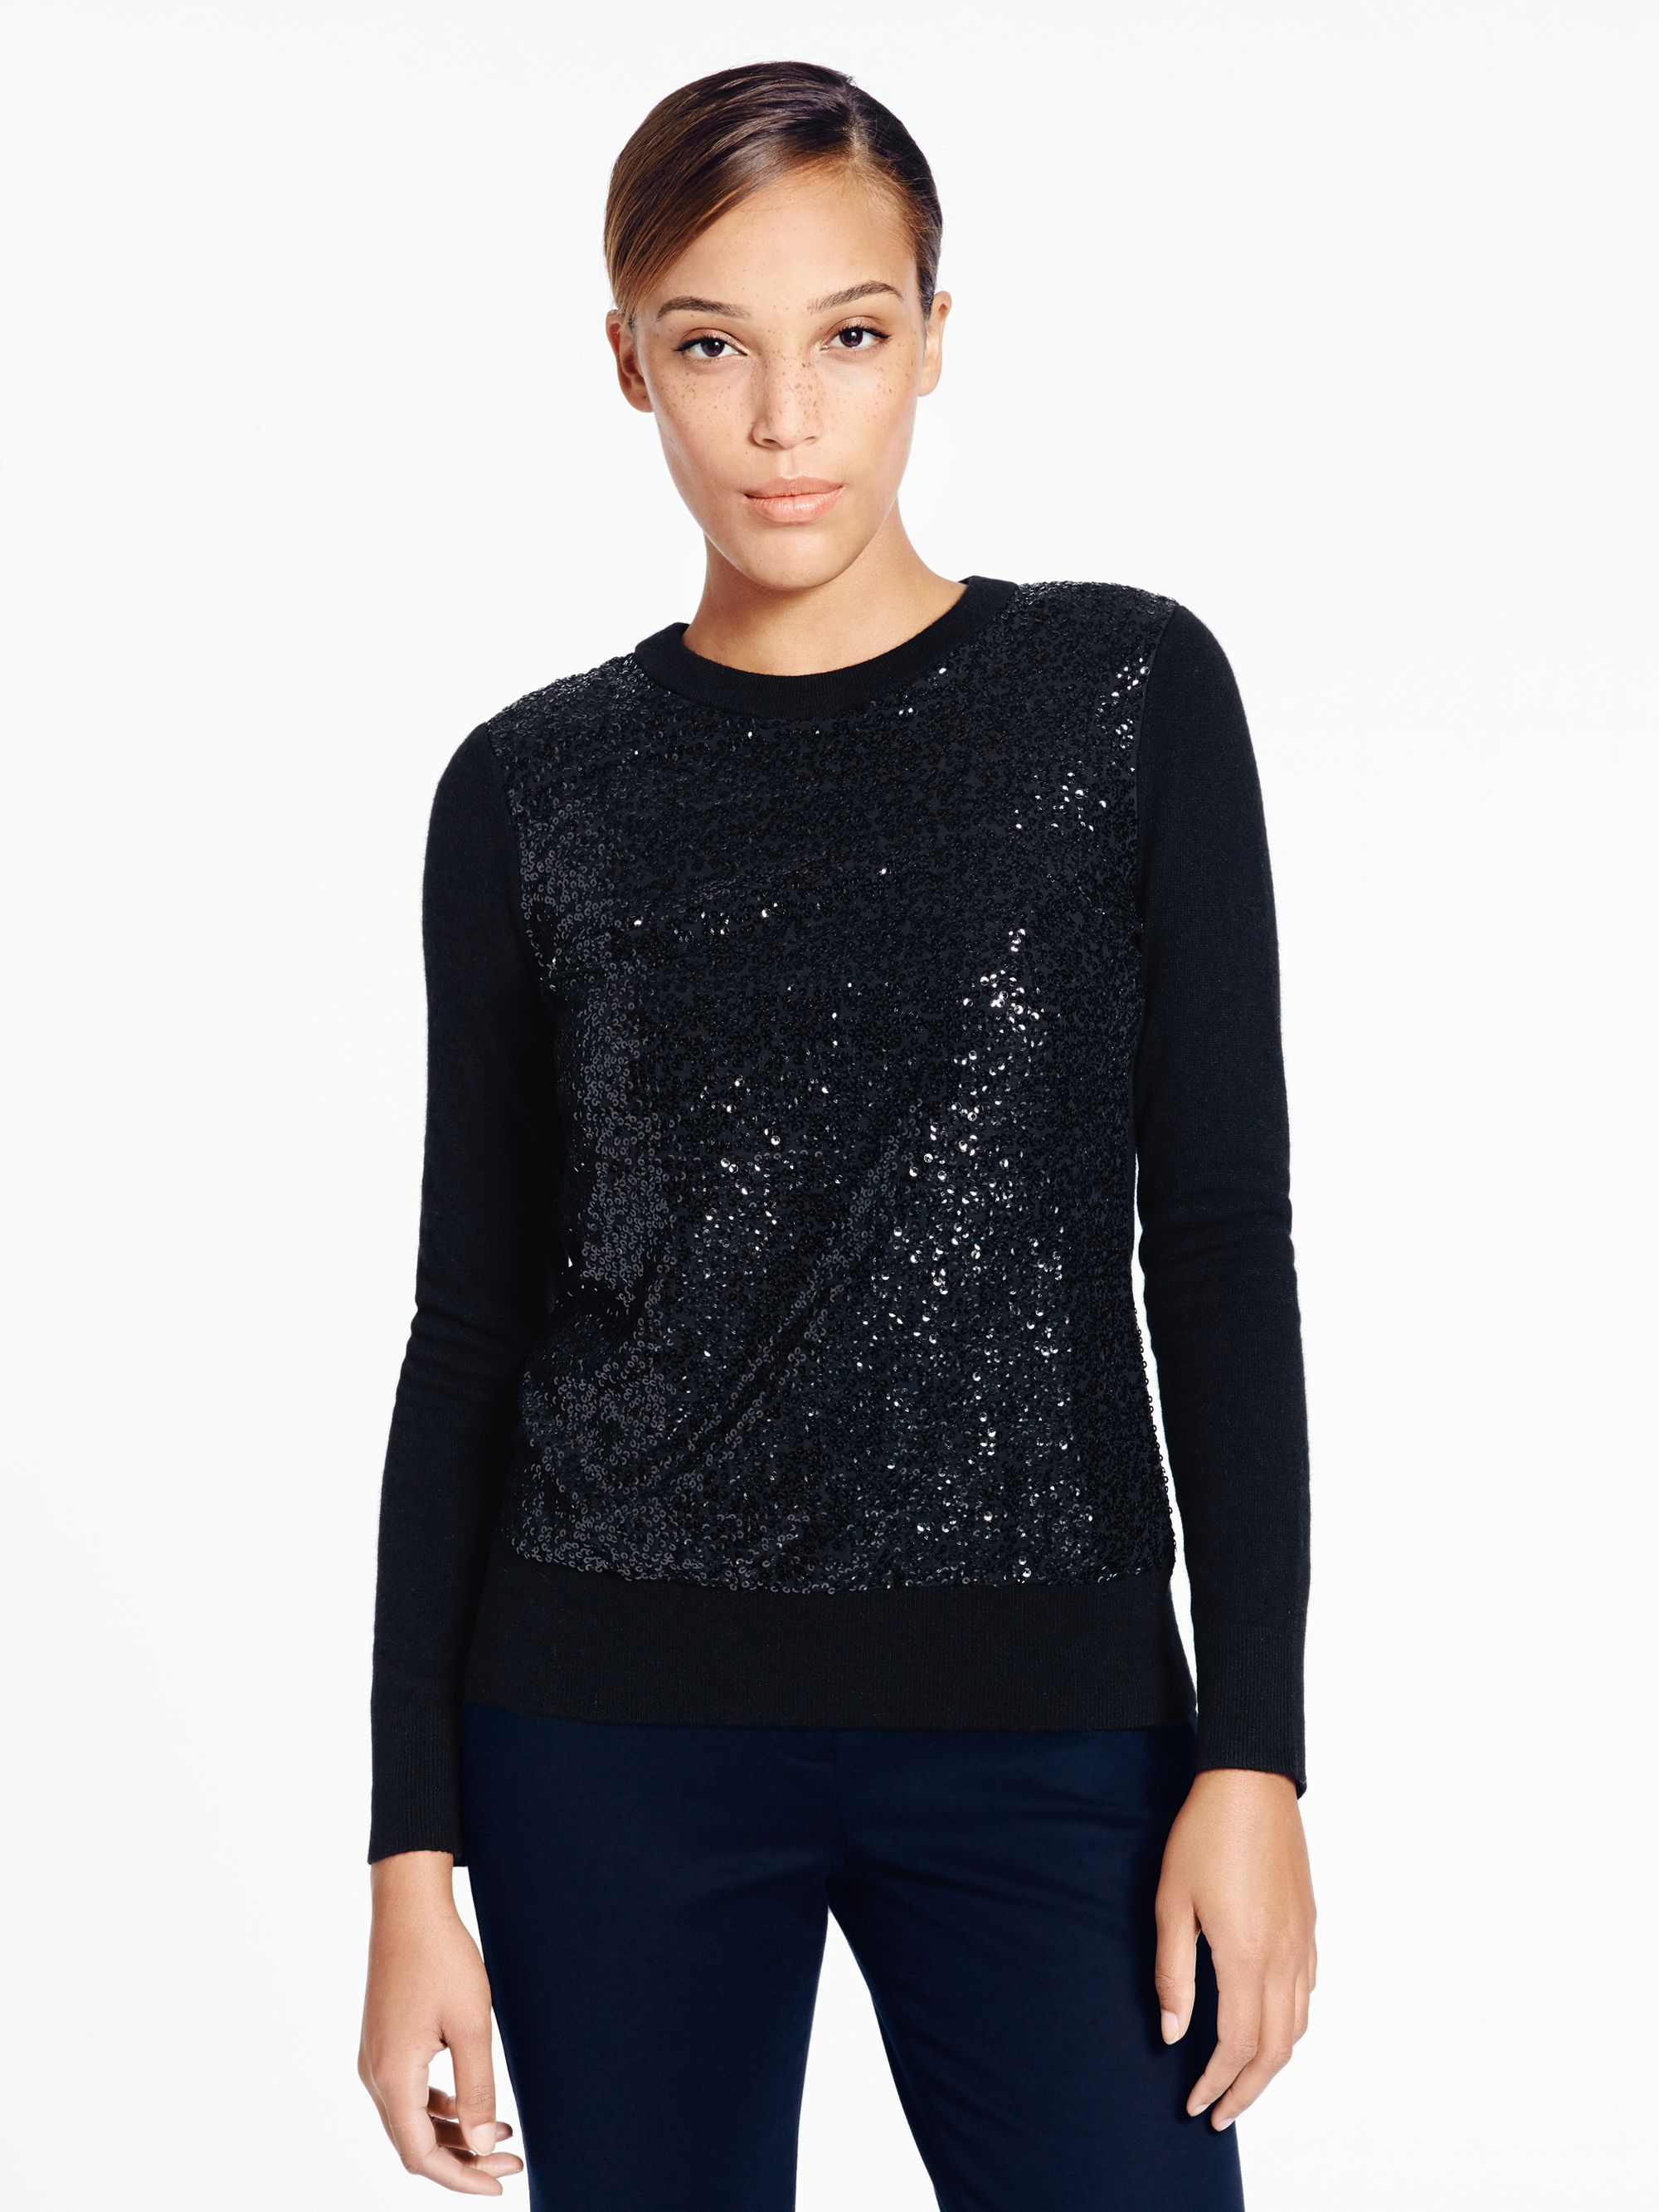 Kate spade new york Fluffy Wool Sequin Sweater in Natural | Lyst